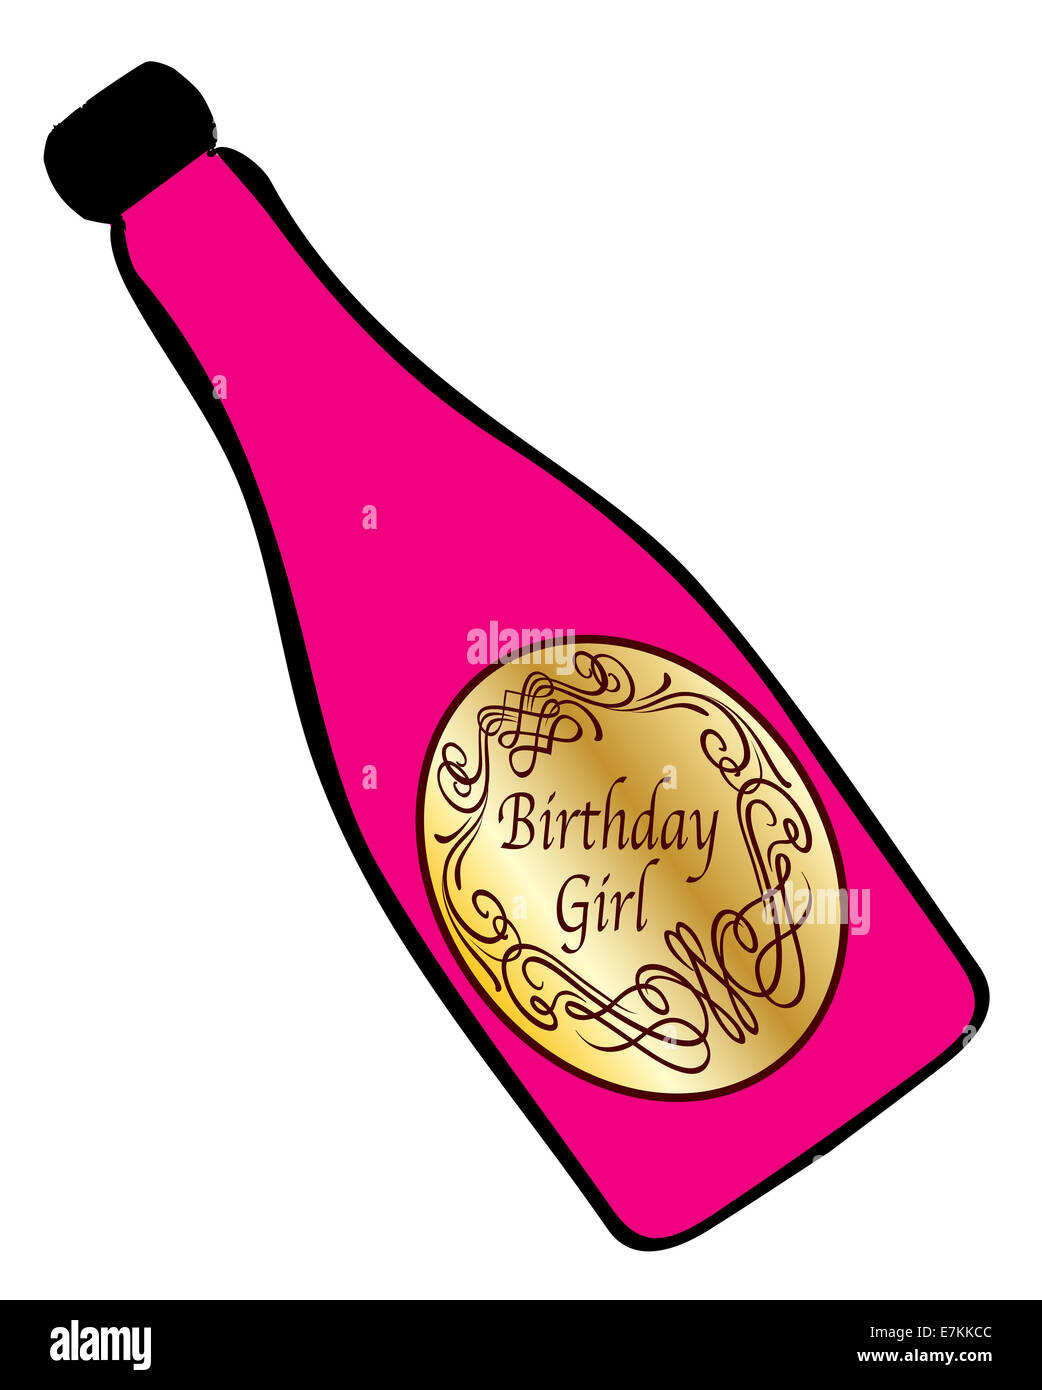 A congratulations bottle of pink champagne on a white background with the  legend Birthday Girl Stock Photo - Alamy